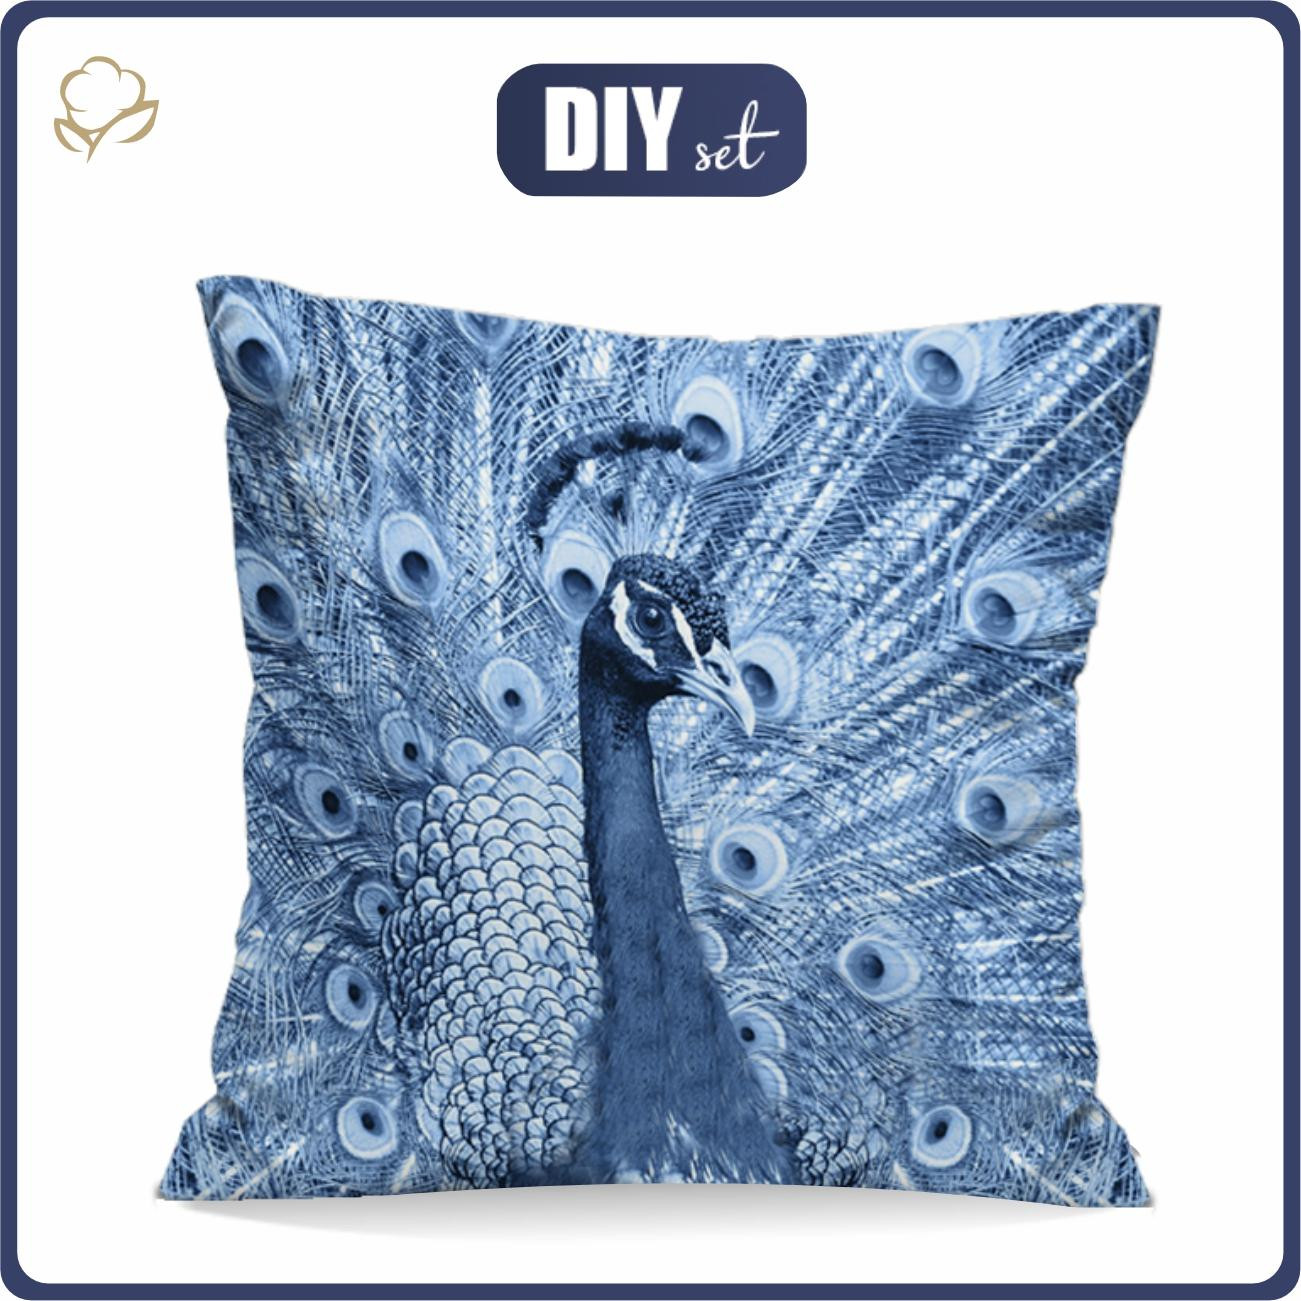 PILLOW 45X45 - PEACOCK (CLASSIC BLUE) - Waterproof woven fabric - sewing set